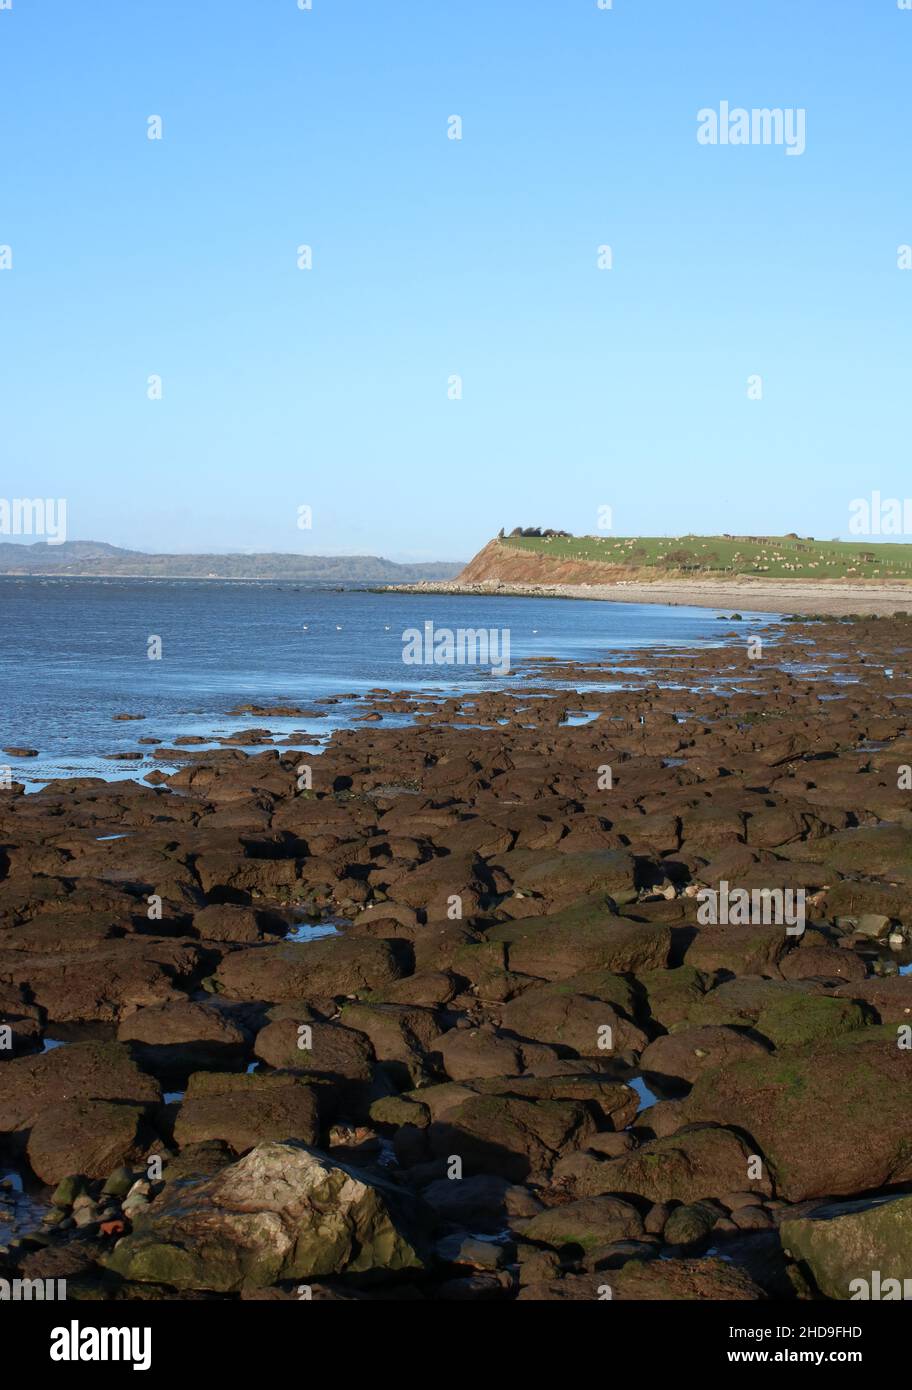 View looking north along shore of Morecambe Bay at Hest Bank, Lancashire after high tide on a sunny January afternoon with evidence of coastal erosion. Stock Photo